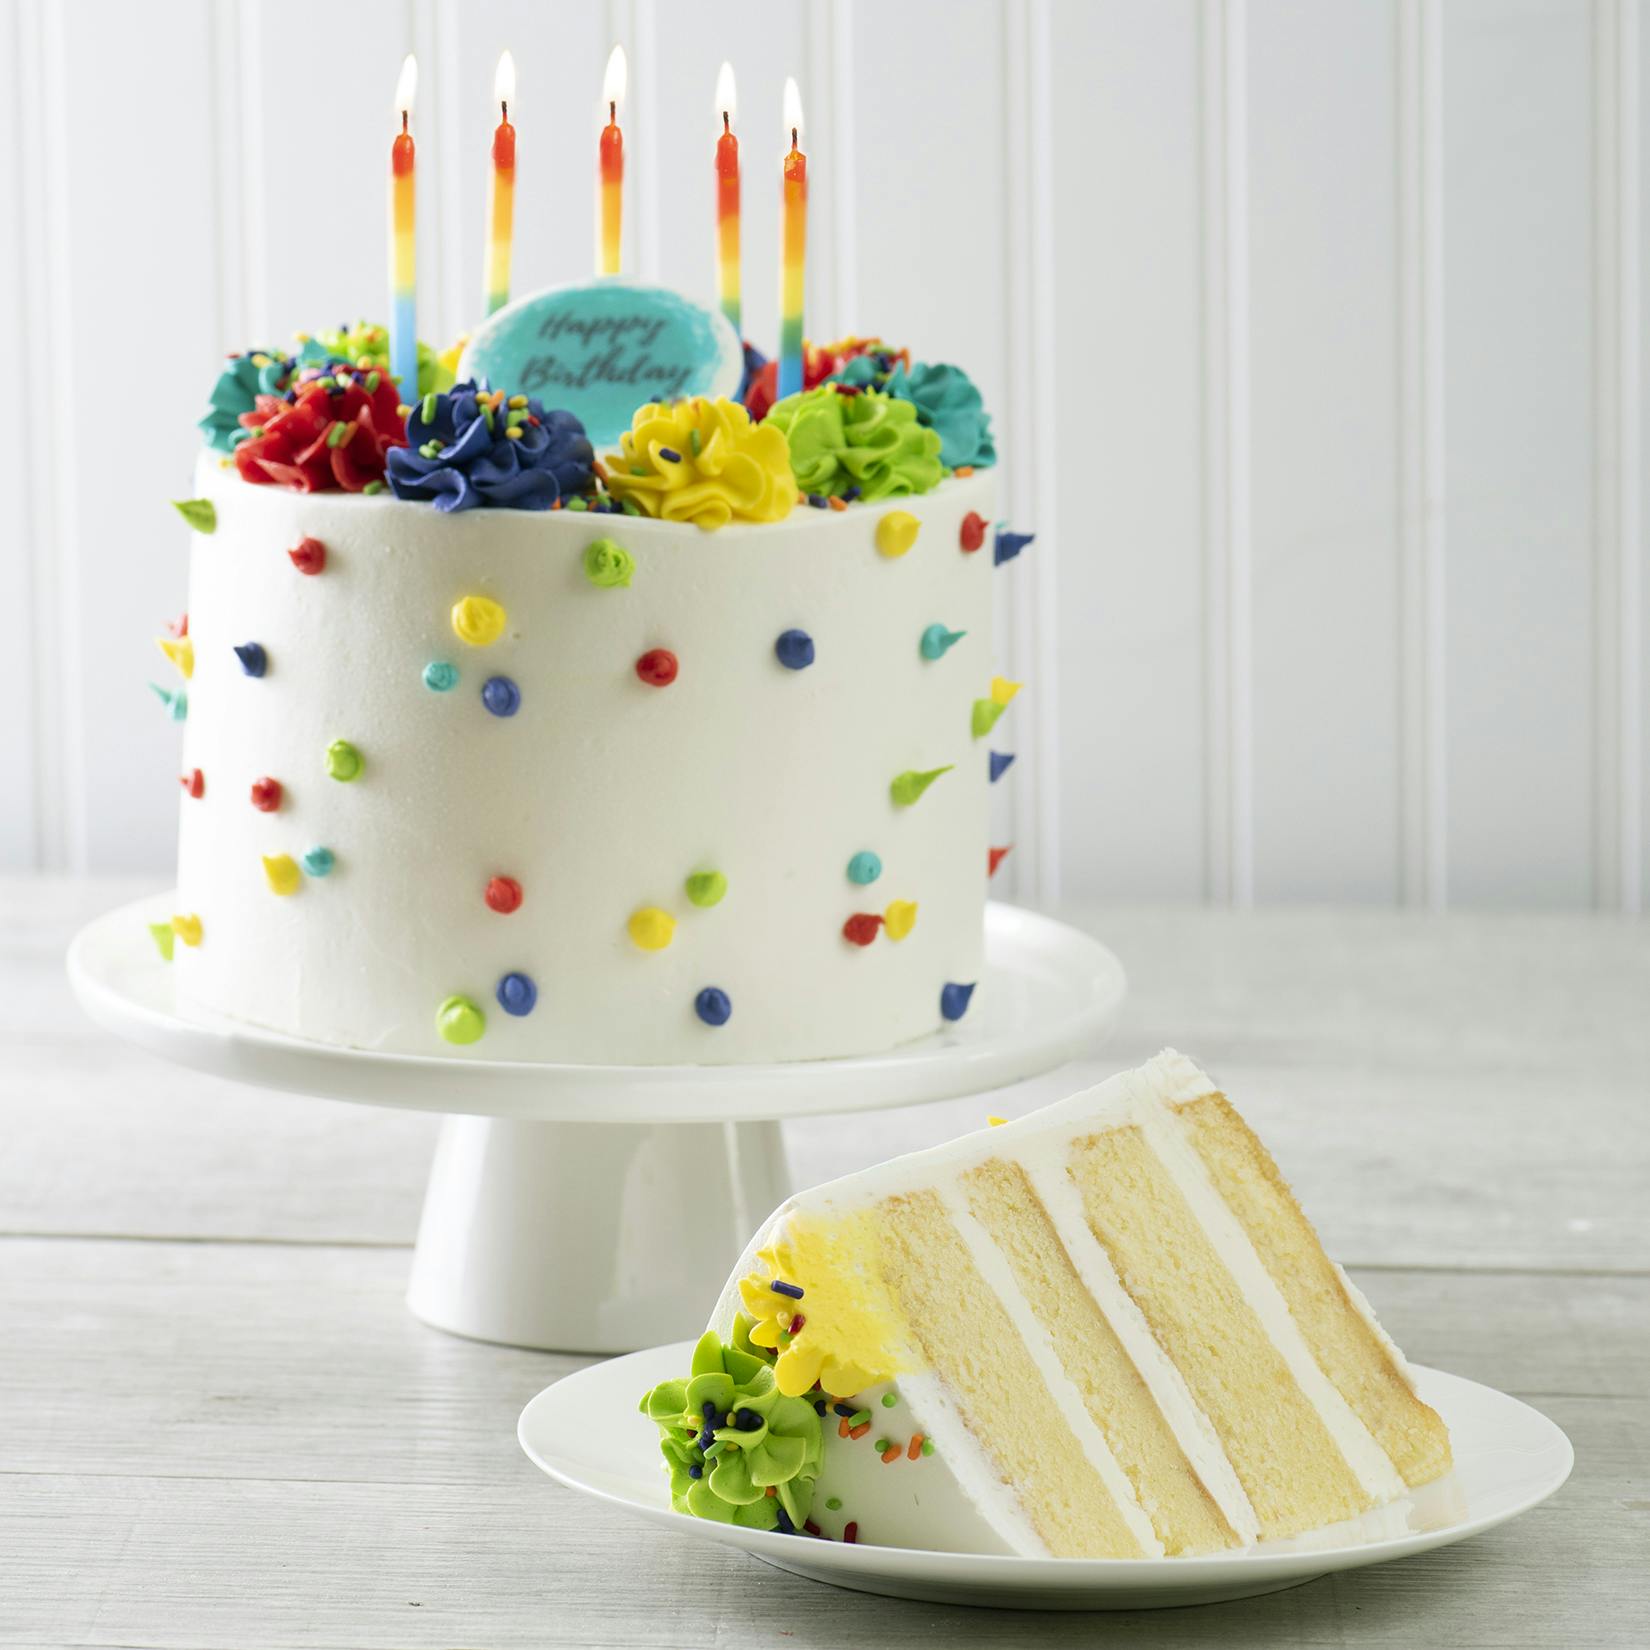 Send Cakes to USA | Cake Delivery in USA from India | FlowerAura